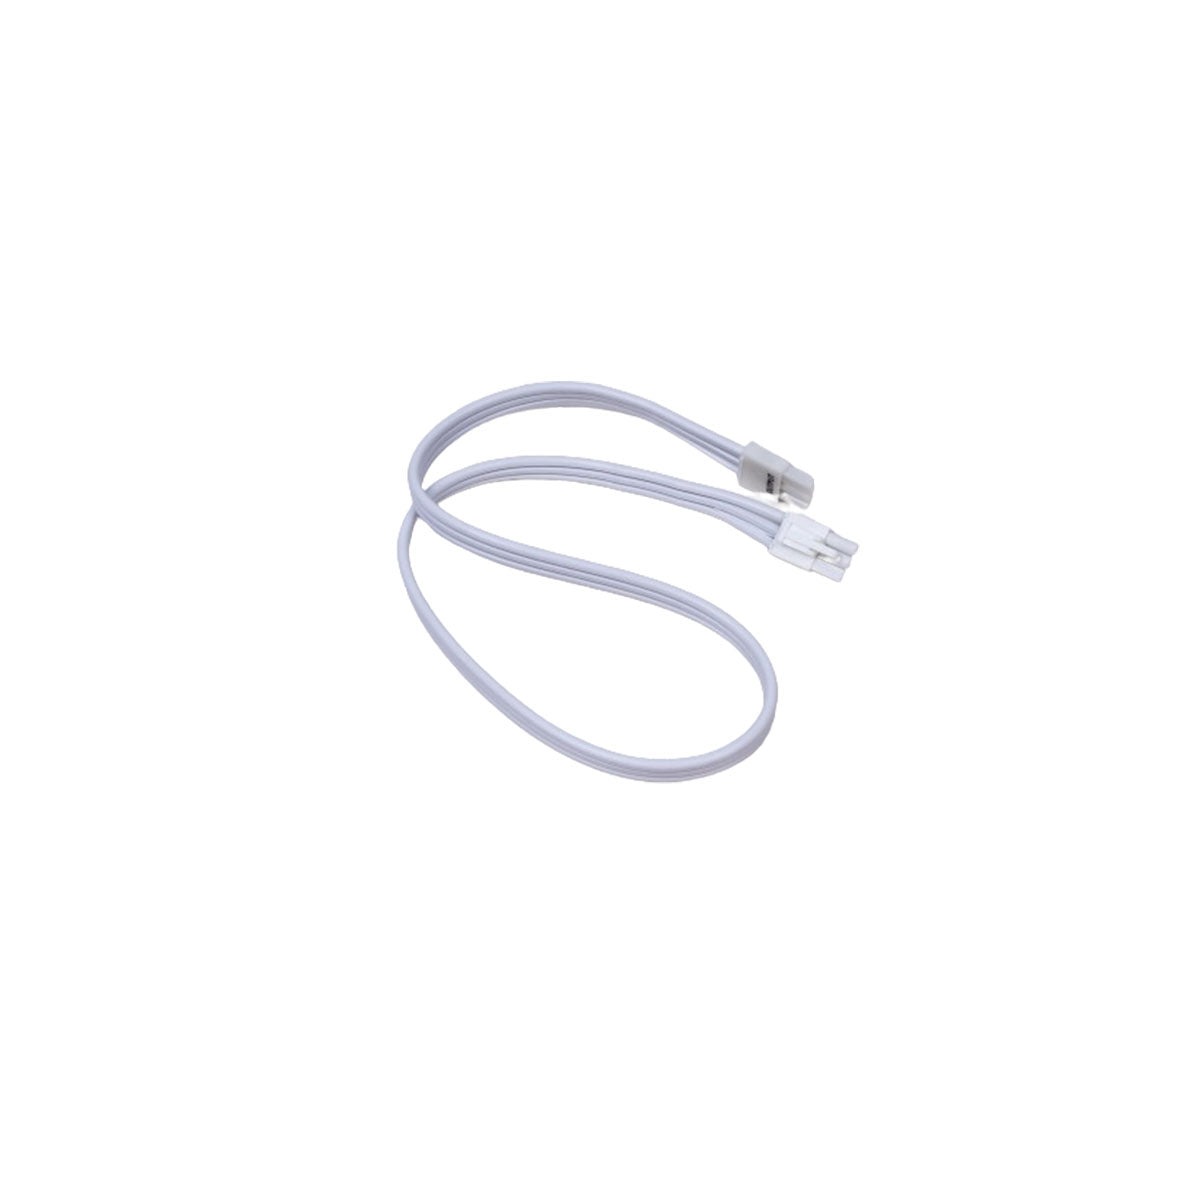 24 in. Jumper Cable for COVE 120V LED Switchable Fixture, White